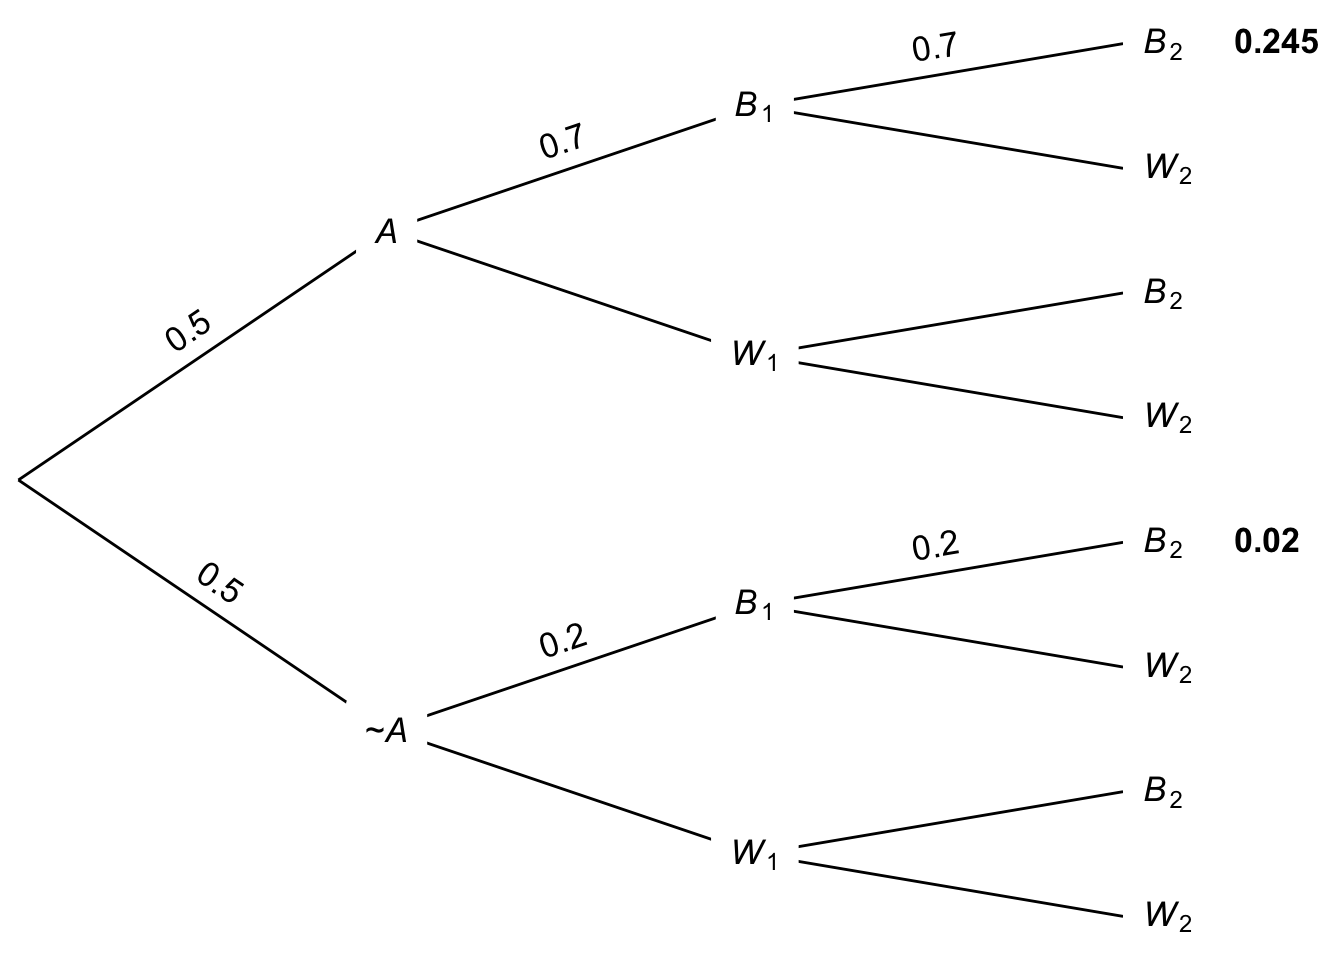 Tree diagram for two draws with replacement